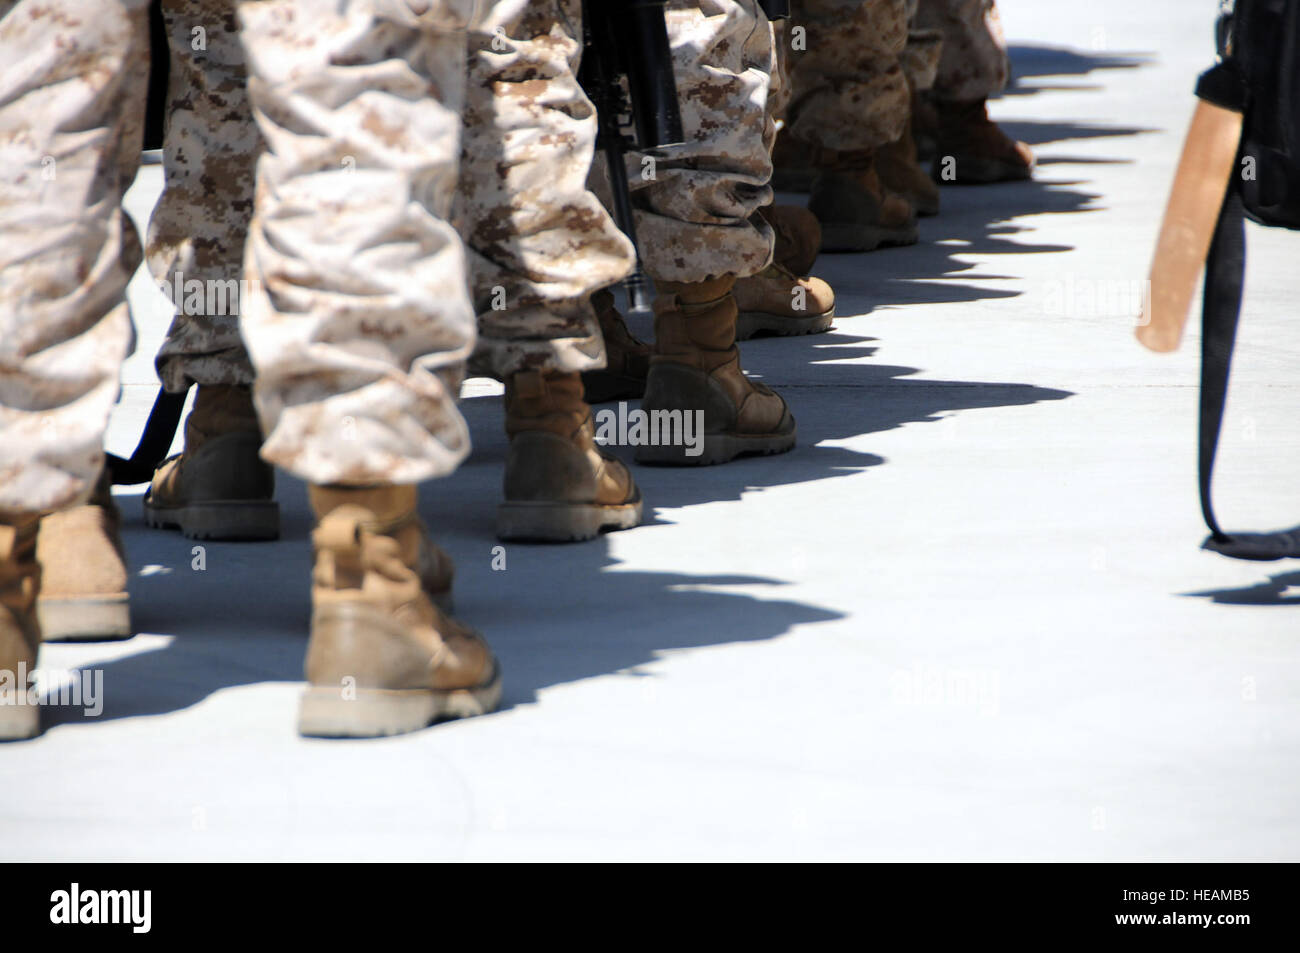 KABUL - More than 108 Marines from 2nd Battalion, 5th Marines, out of Camp Pendleton, Calif., line up at Kabul International Airport March 31, beginning their 90-day deployment to Afghanistan in support of police development.  Staff Sgt. Sarah Brown/) Stock Photo